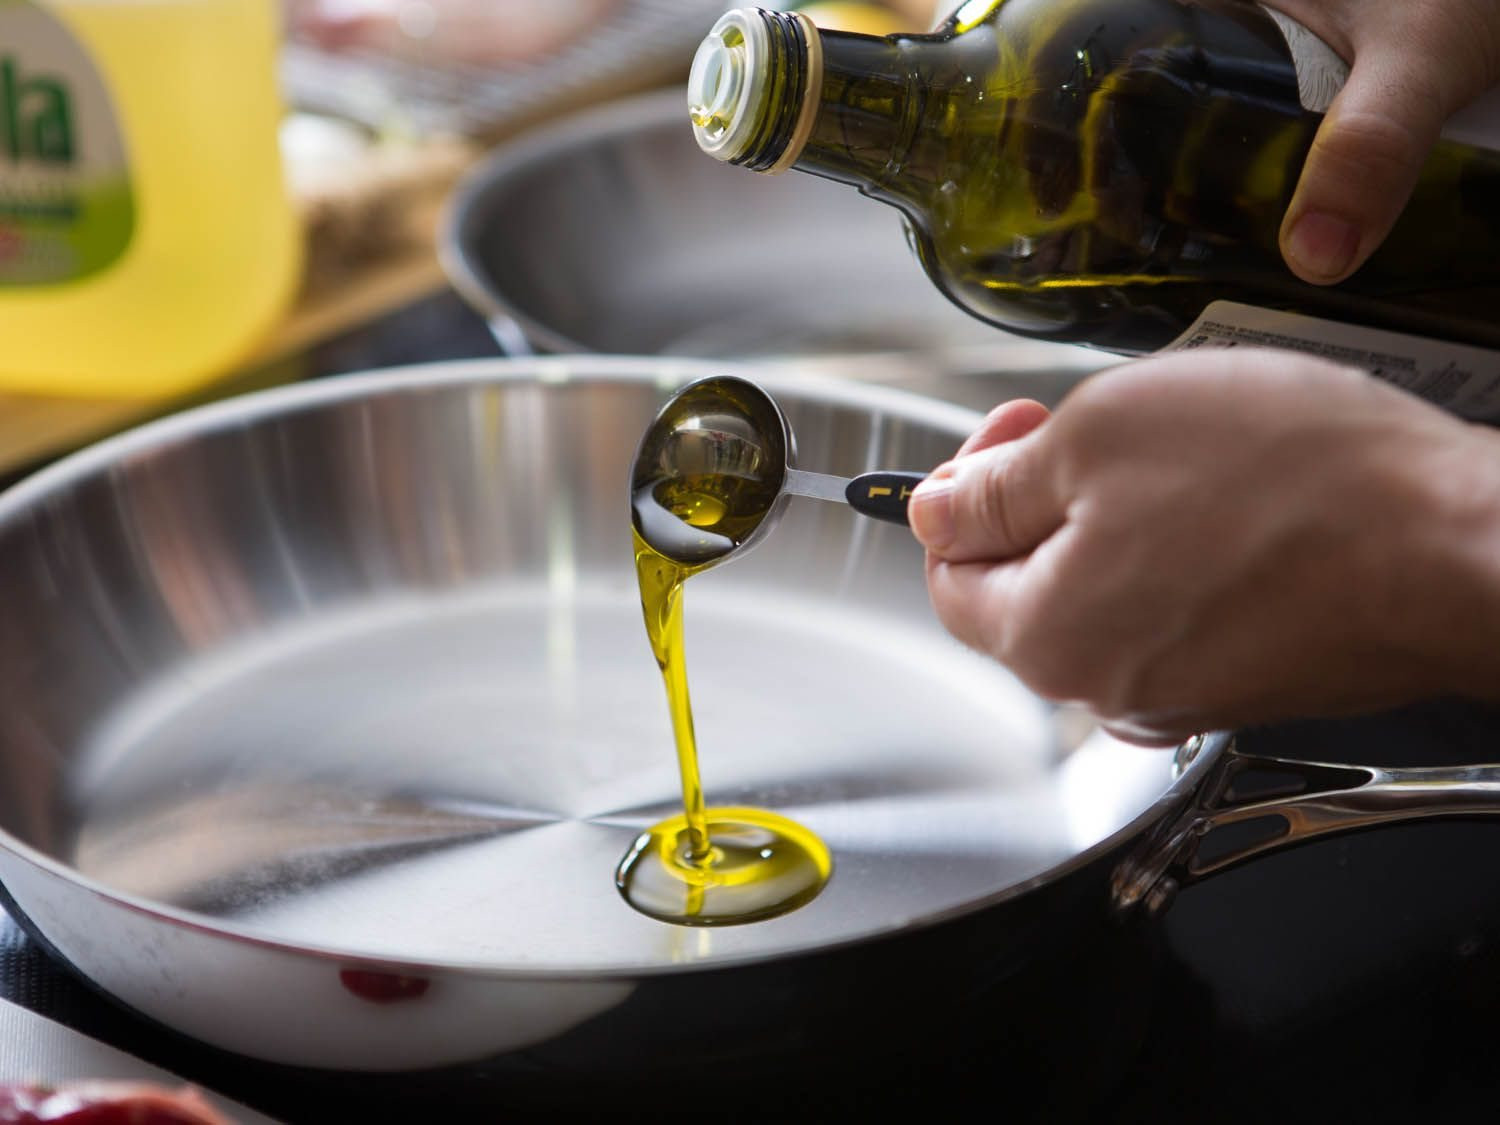 __opt__aboutcom__coeus__resources__content_migration__serious_eats__seriouseats.com__images__2015__03__20150320-cooking-olive-oil-vicky-wasik-3-3666952dafbb4a7ebacbe27d17f469bc.jpg